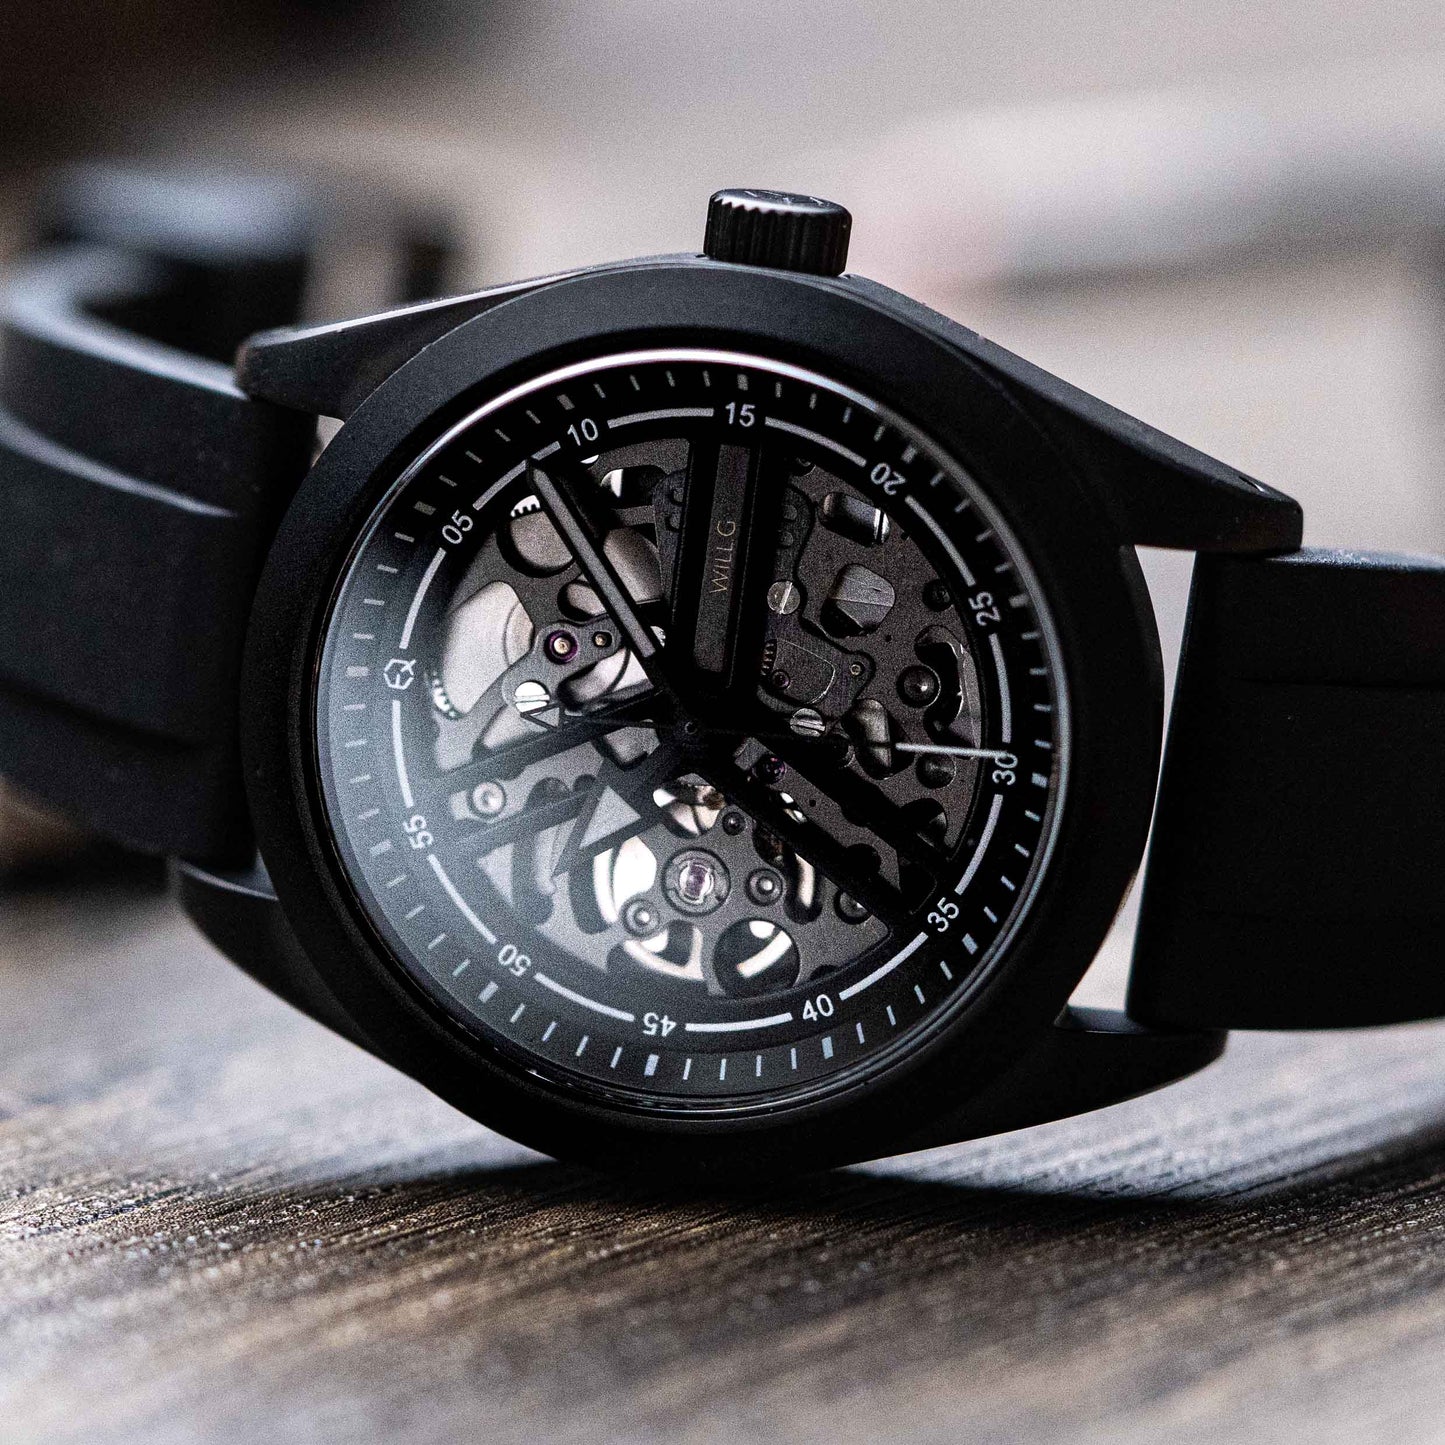 EONIQ expedition watch - custom watch with seiko movement and free name engraving - black case 